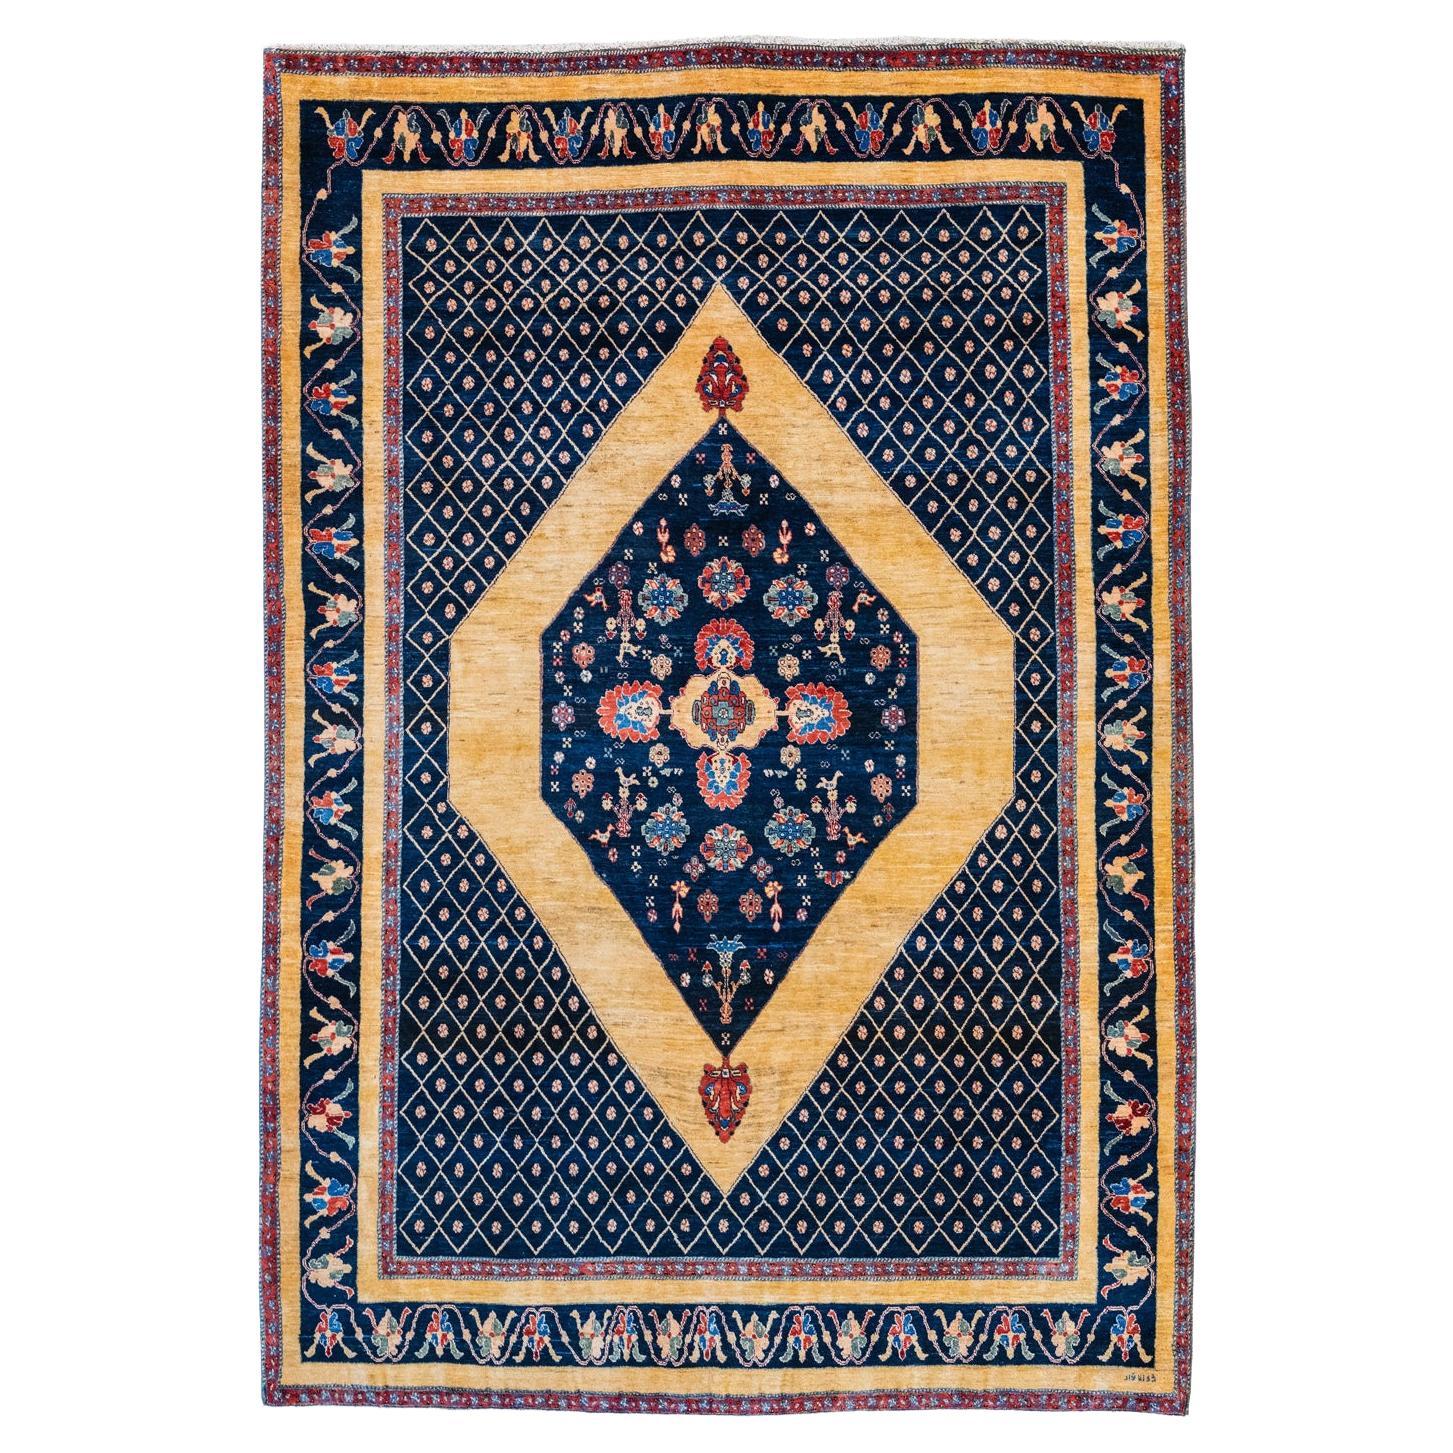 Gold and Indigo Persian Shekarloo Carpet, Wool, Hand-Knotted, 7' x 9' For Sale